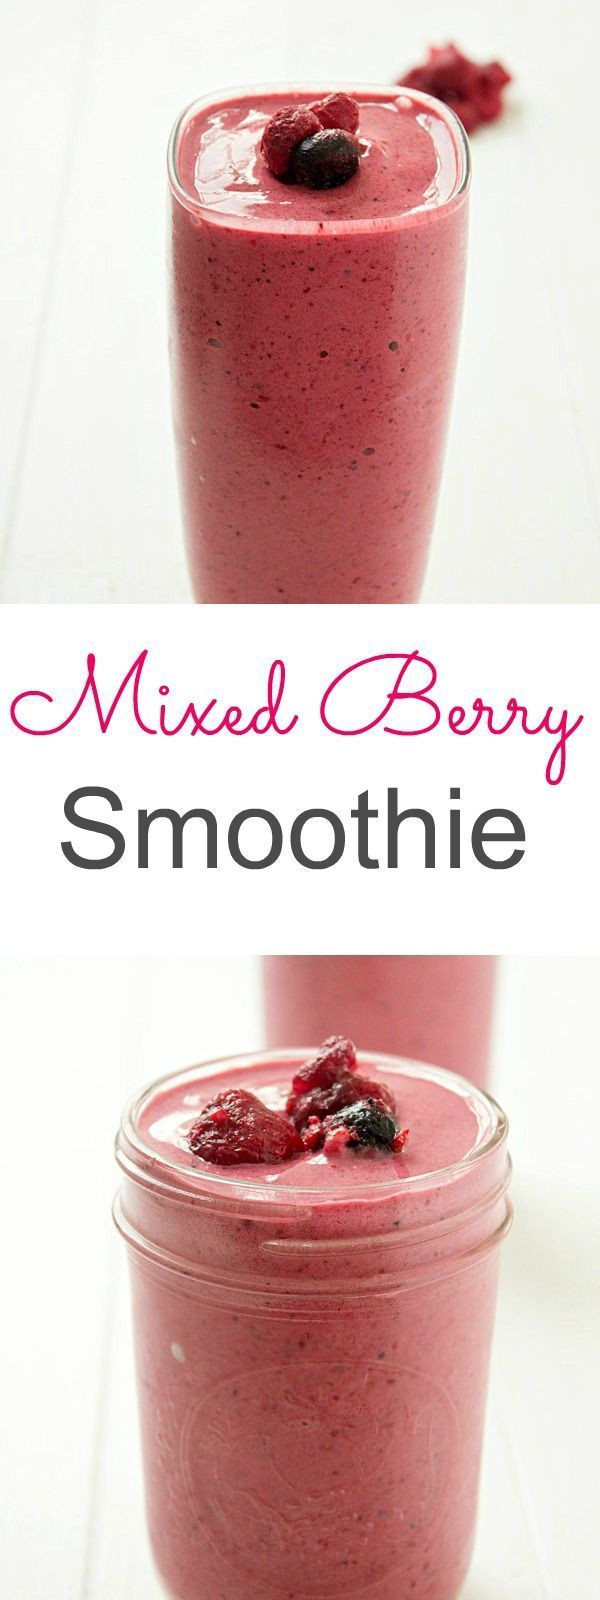 Easy And Healthy Smoothies
 The 25 best Easy smoothie recipes ideas on Pinterest